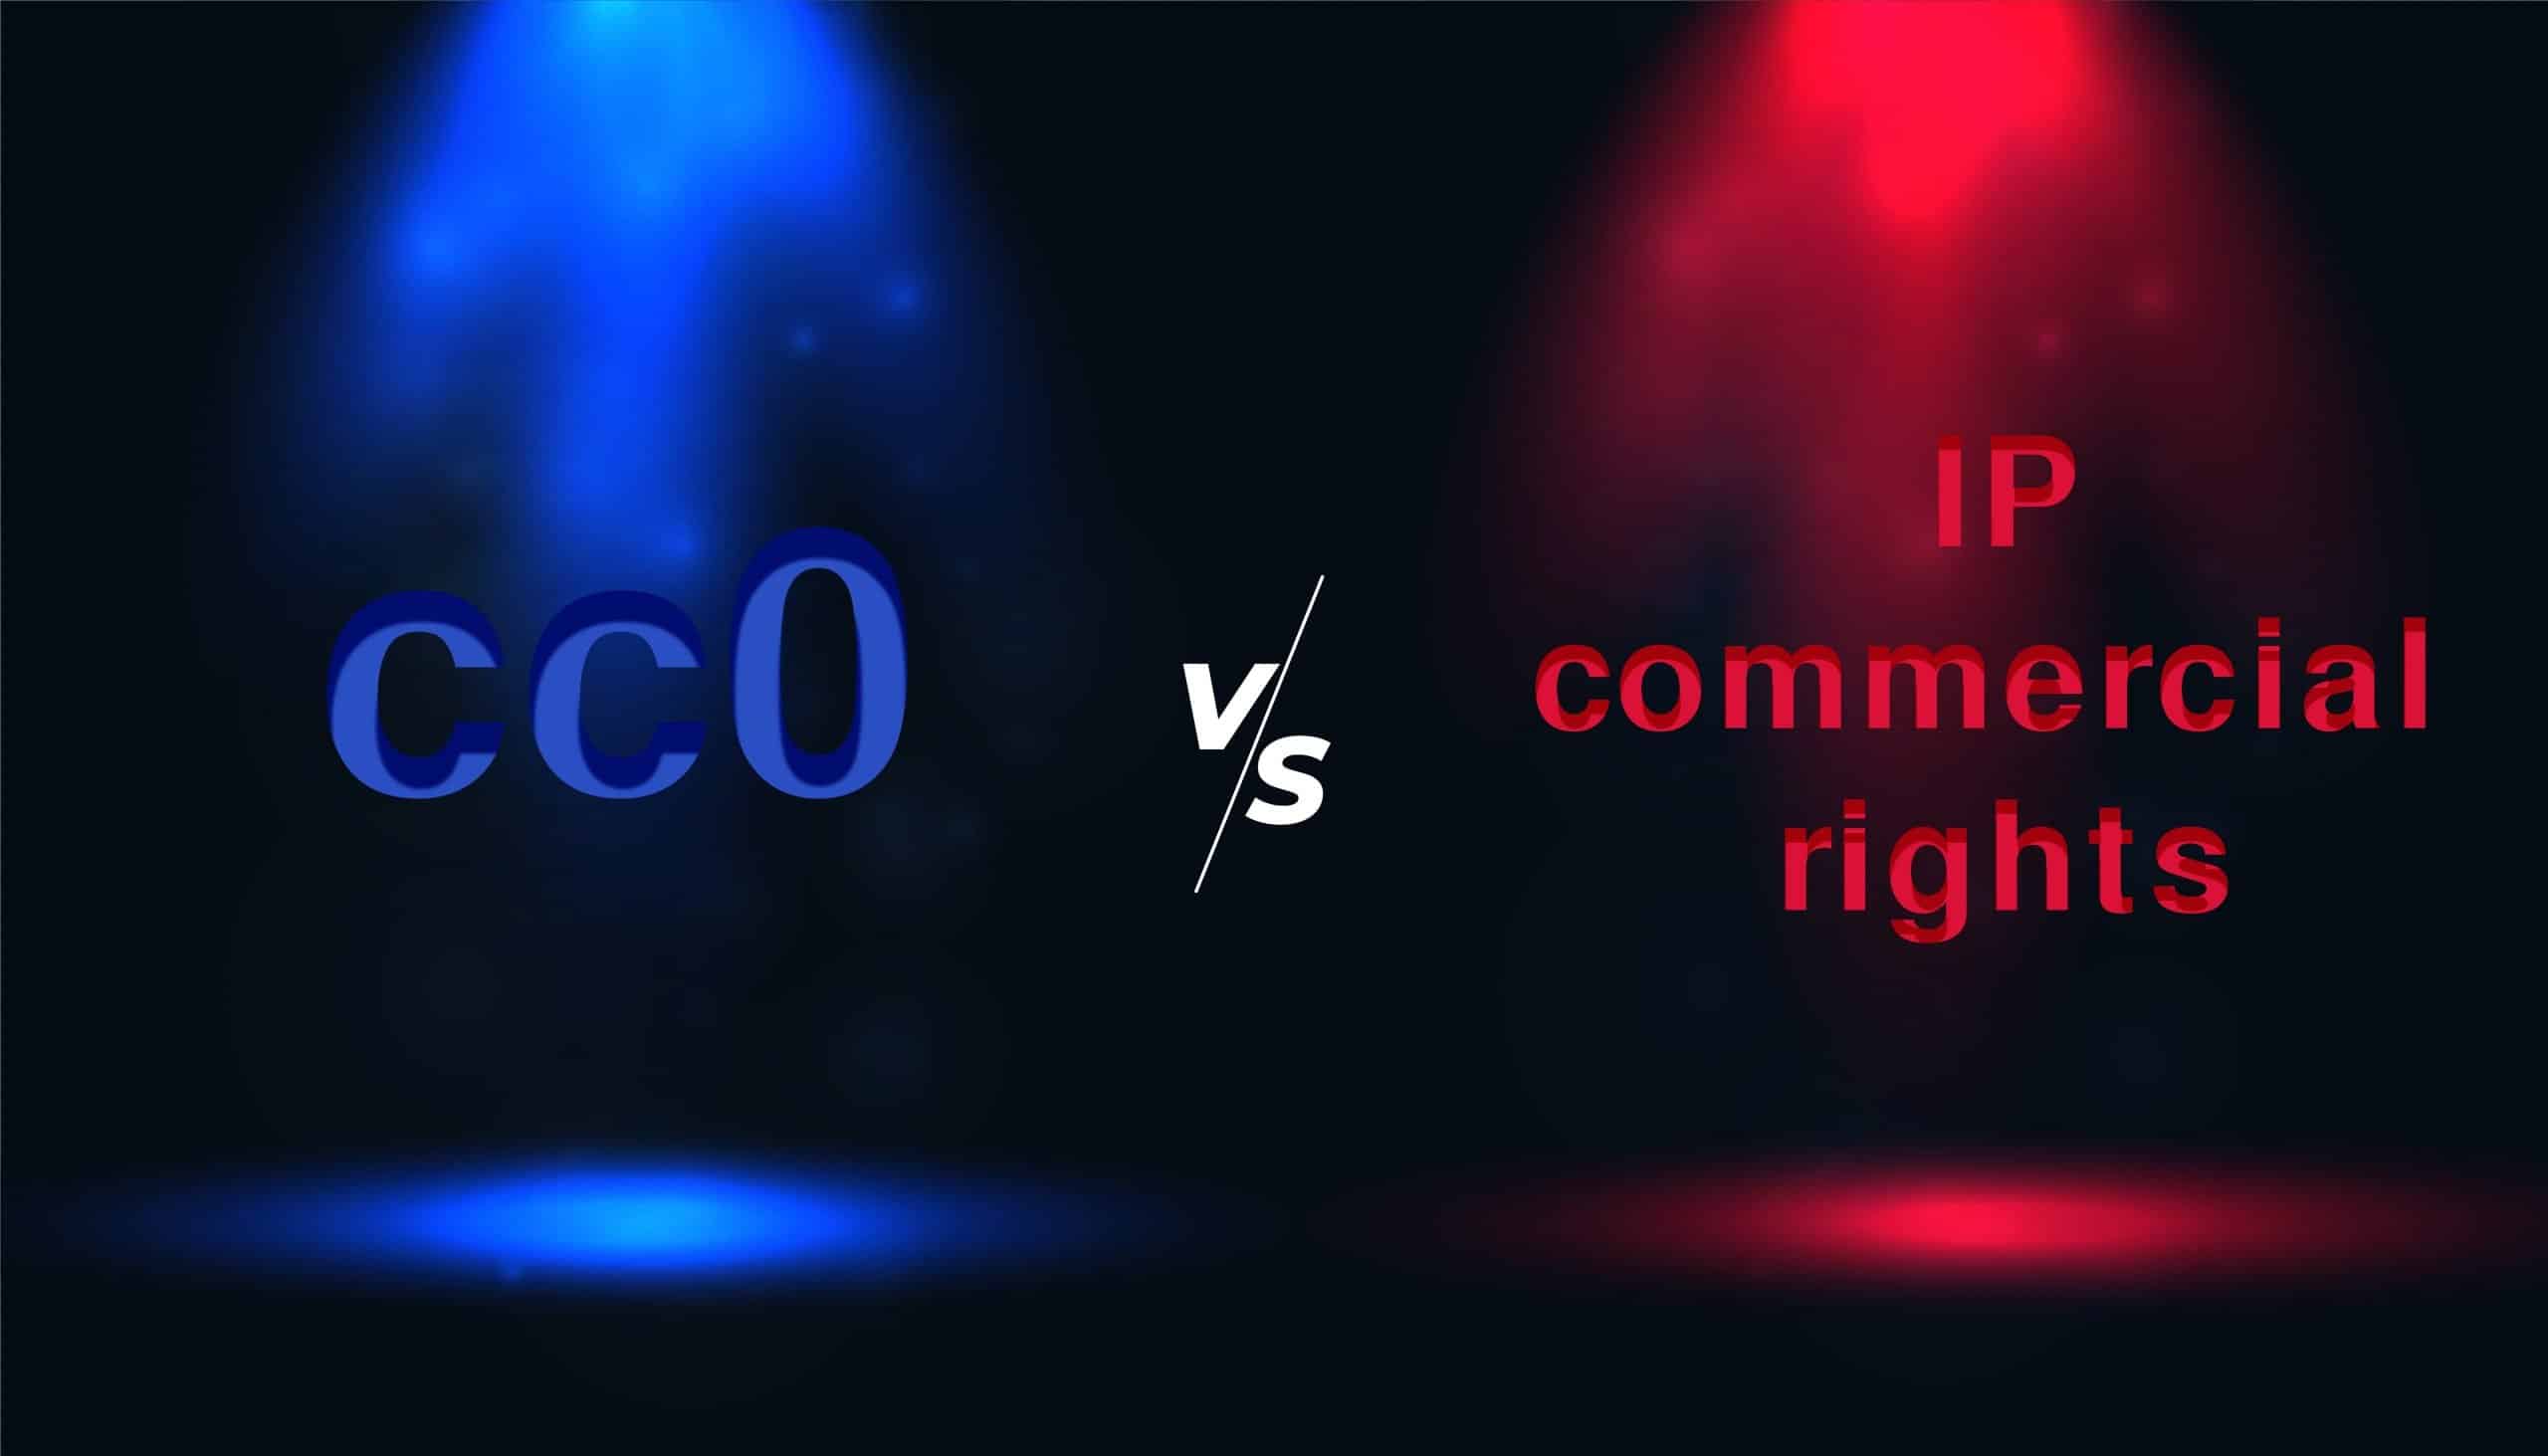 abstract image of cc0 vs ip commercial rights